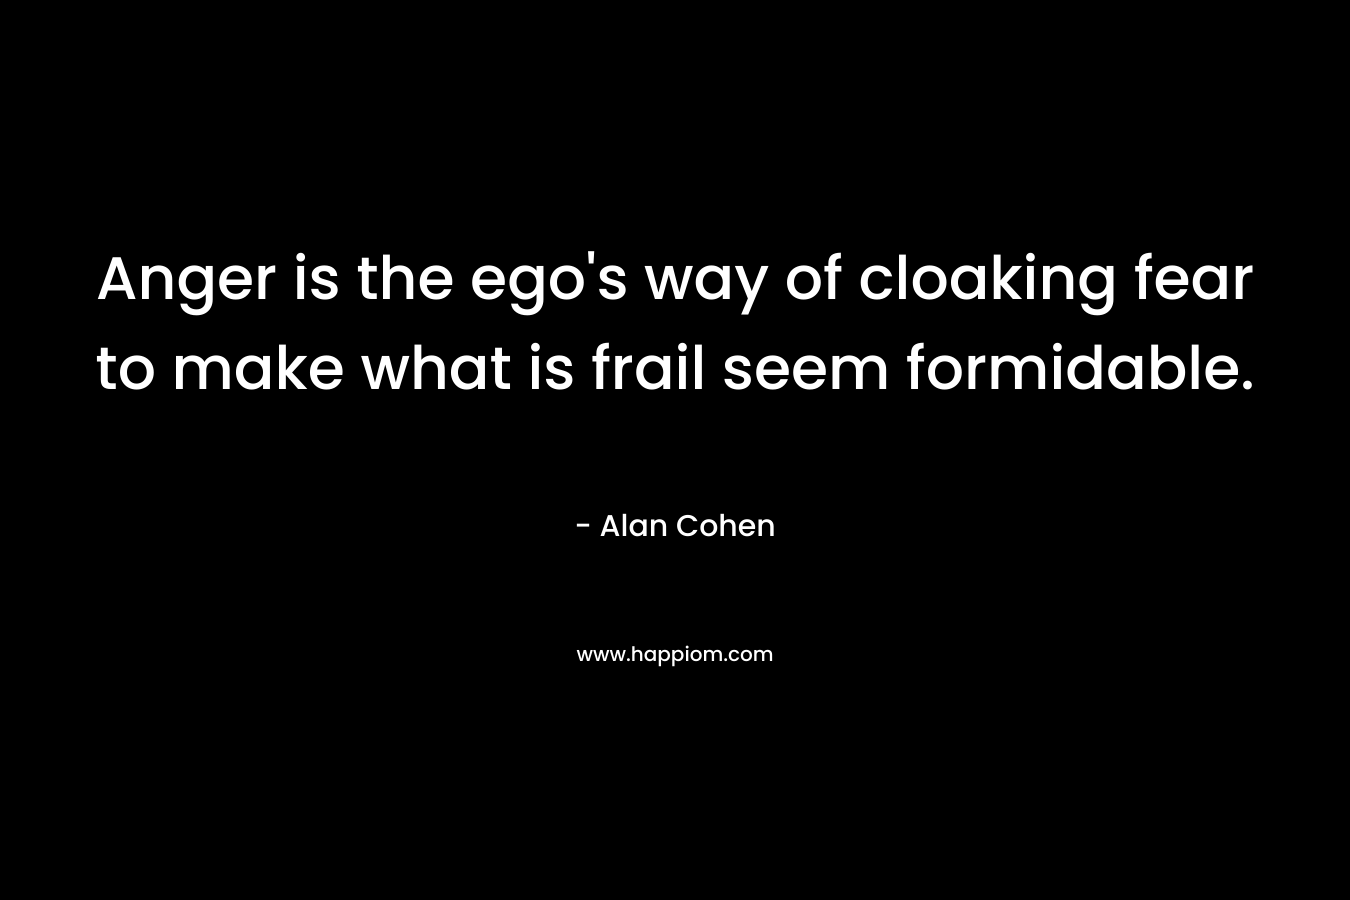 Anger is the ego’s way of cloaking fear to make what is frail seem formidable. – Alan Cohen